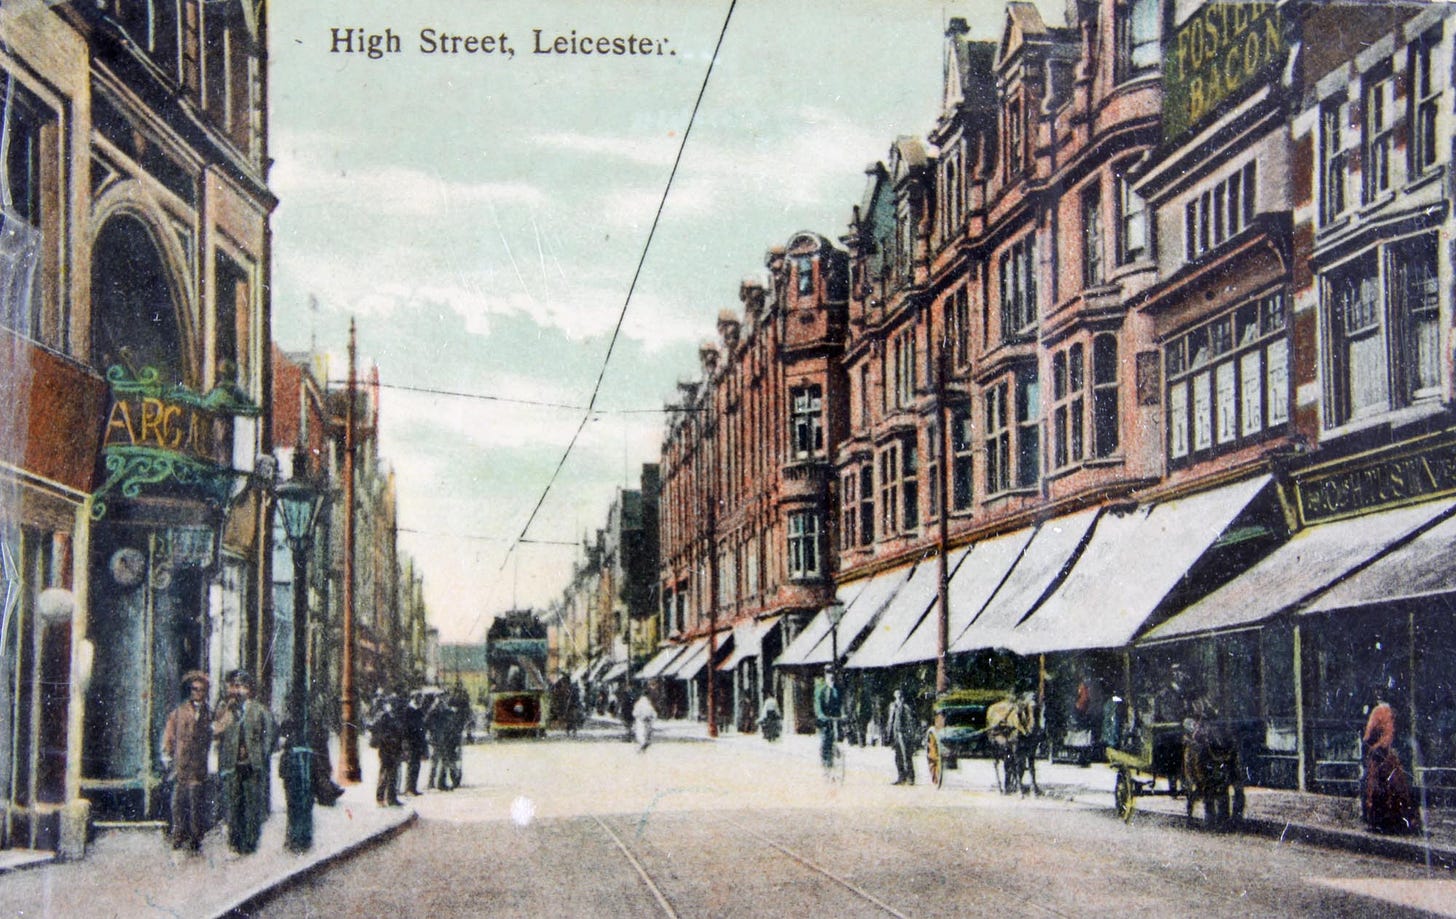 High Street - Story of Leicester